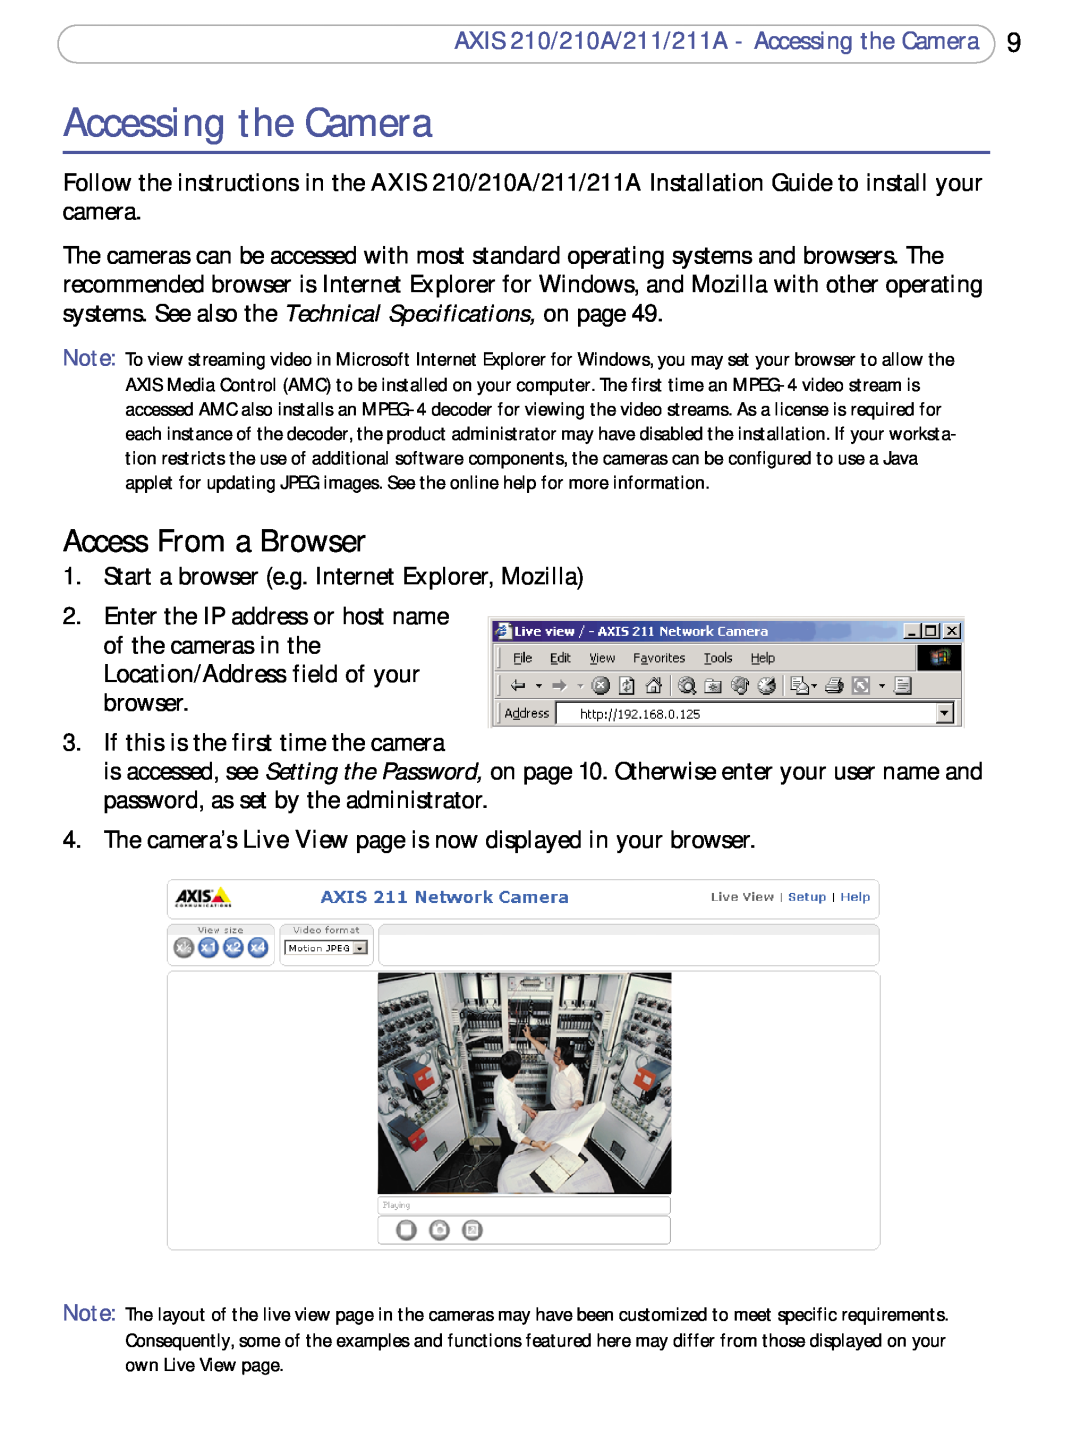 Axis Communications 211a user manual Access From a Browser, AXIS 210/210A/211/211A - Accessing the Camera 